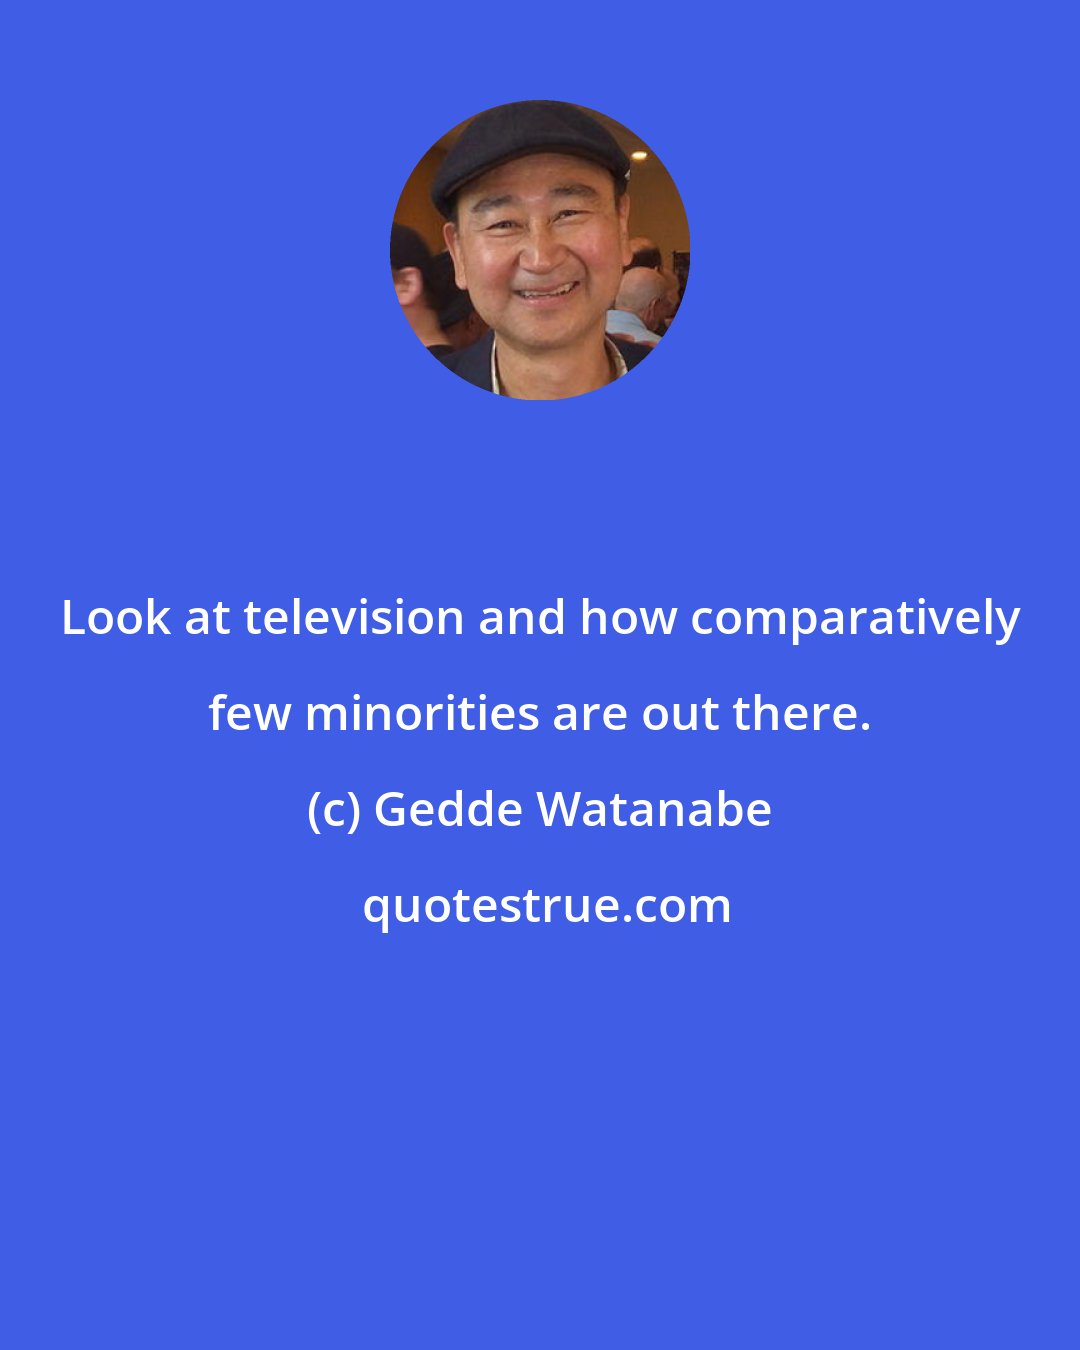 Gedde Watanabe: Look at television and how comparatively few minorities are out there.